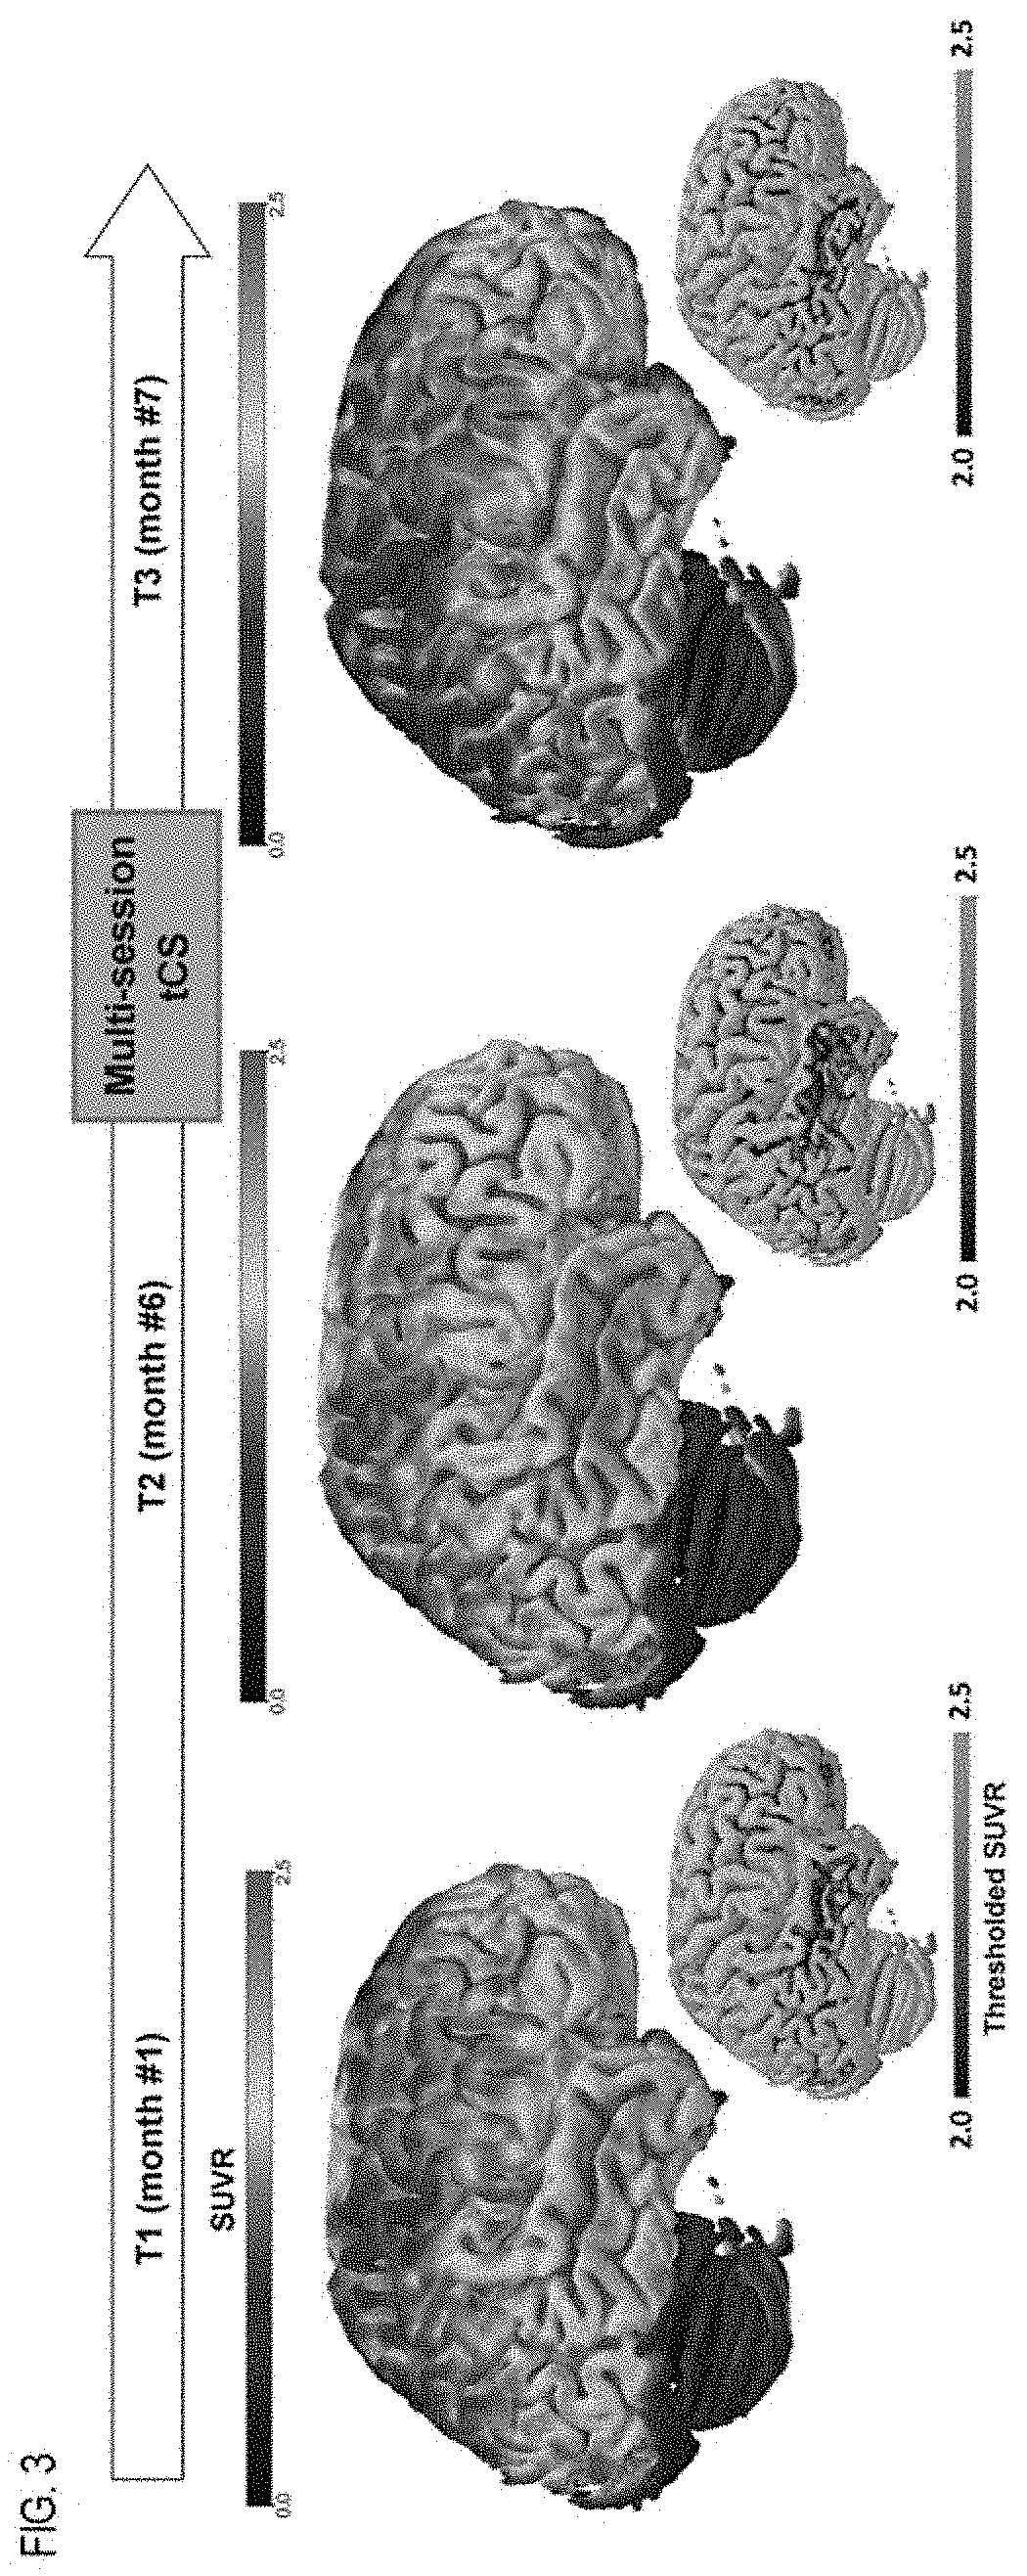 Systems and methods for treating brain disease using targeted neurostimulation